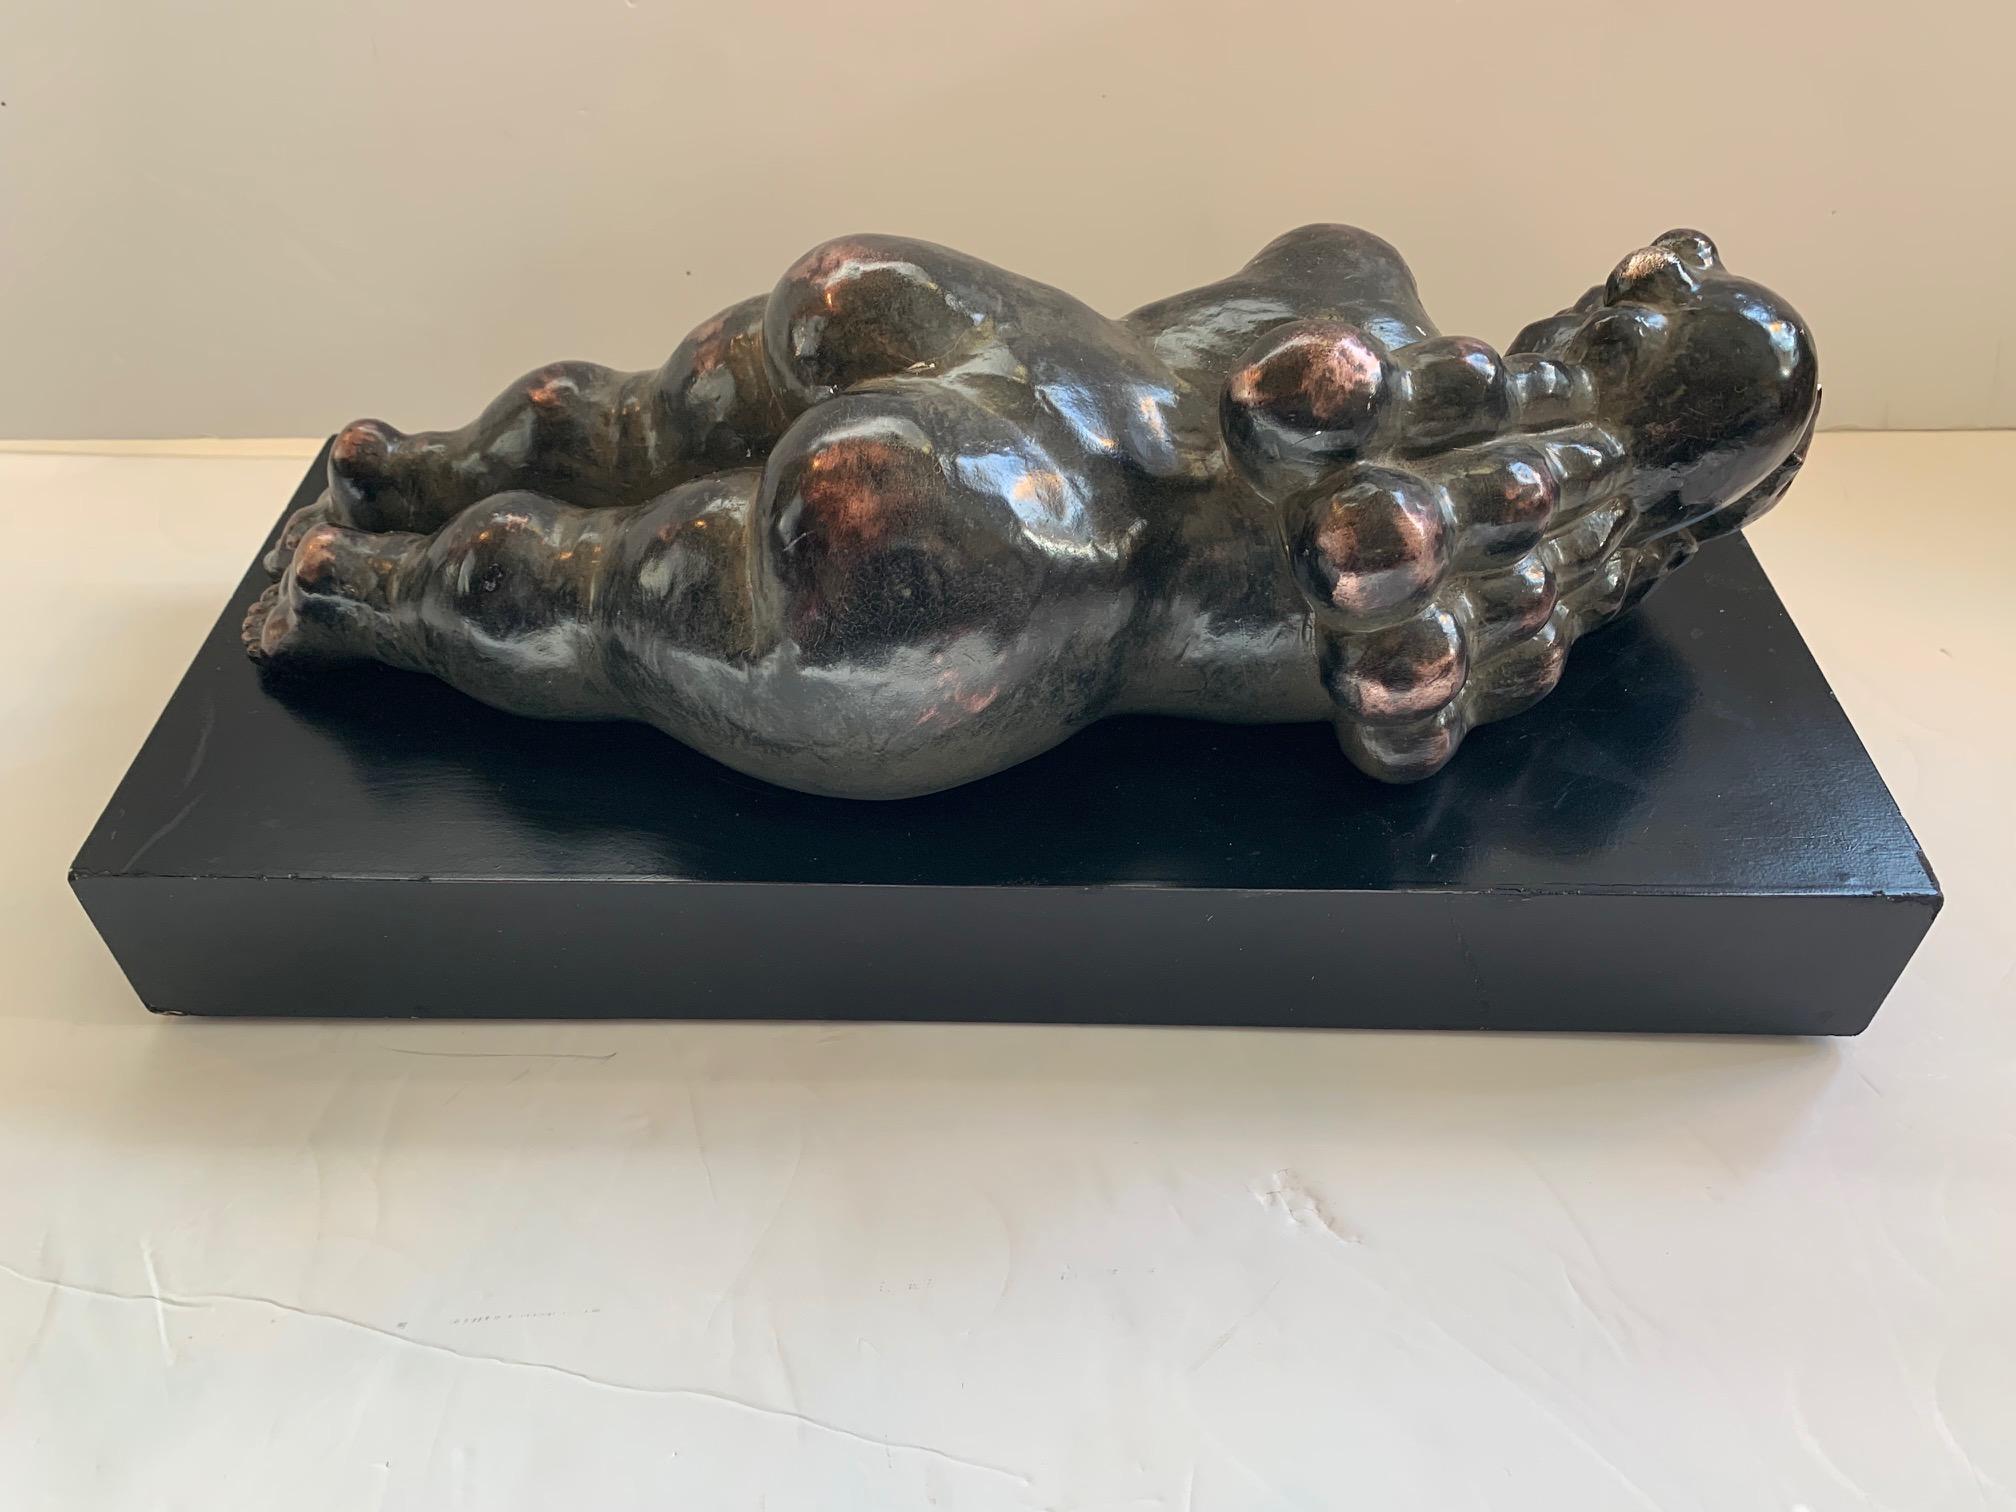 Sensual Reclining Nude Tabletop Sculpture in Style of Botero 1